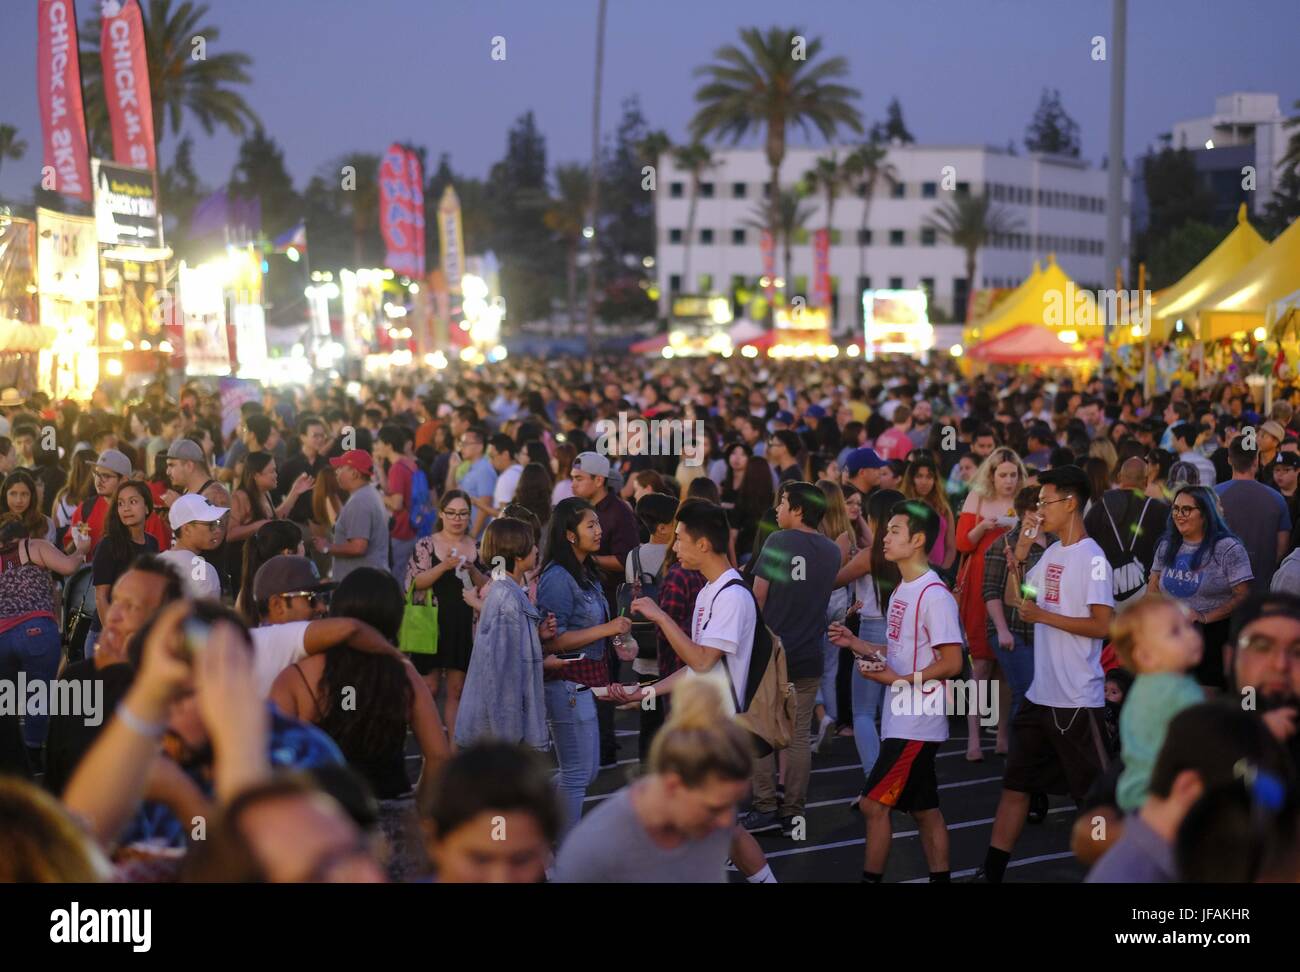 Arcadia, California, USA. 30th June, 2017. The crowd at the '626 Night Market' on June 30, 2017 in Arcadia, California, an event that attracts all generations of the Chinese American community and showcases many San Gabriel Valley food vendors. Credit: Ringo Chiu/ZUMA Wire/Alamy Live News Stock Photo